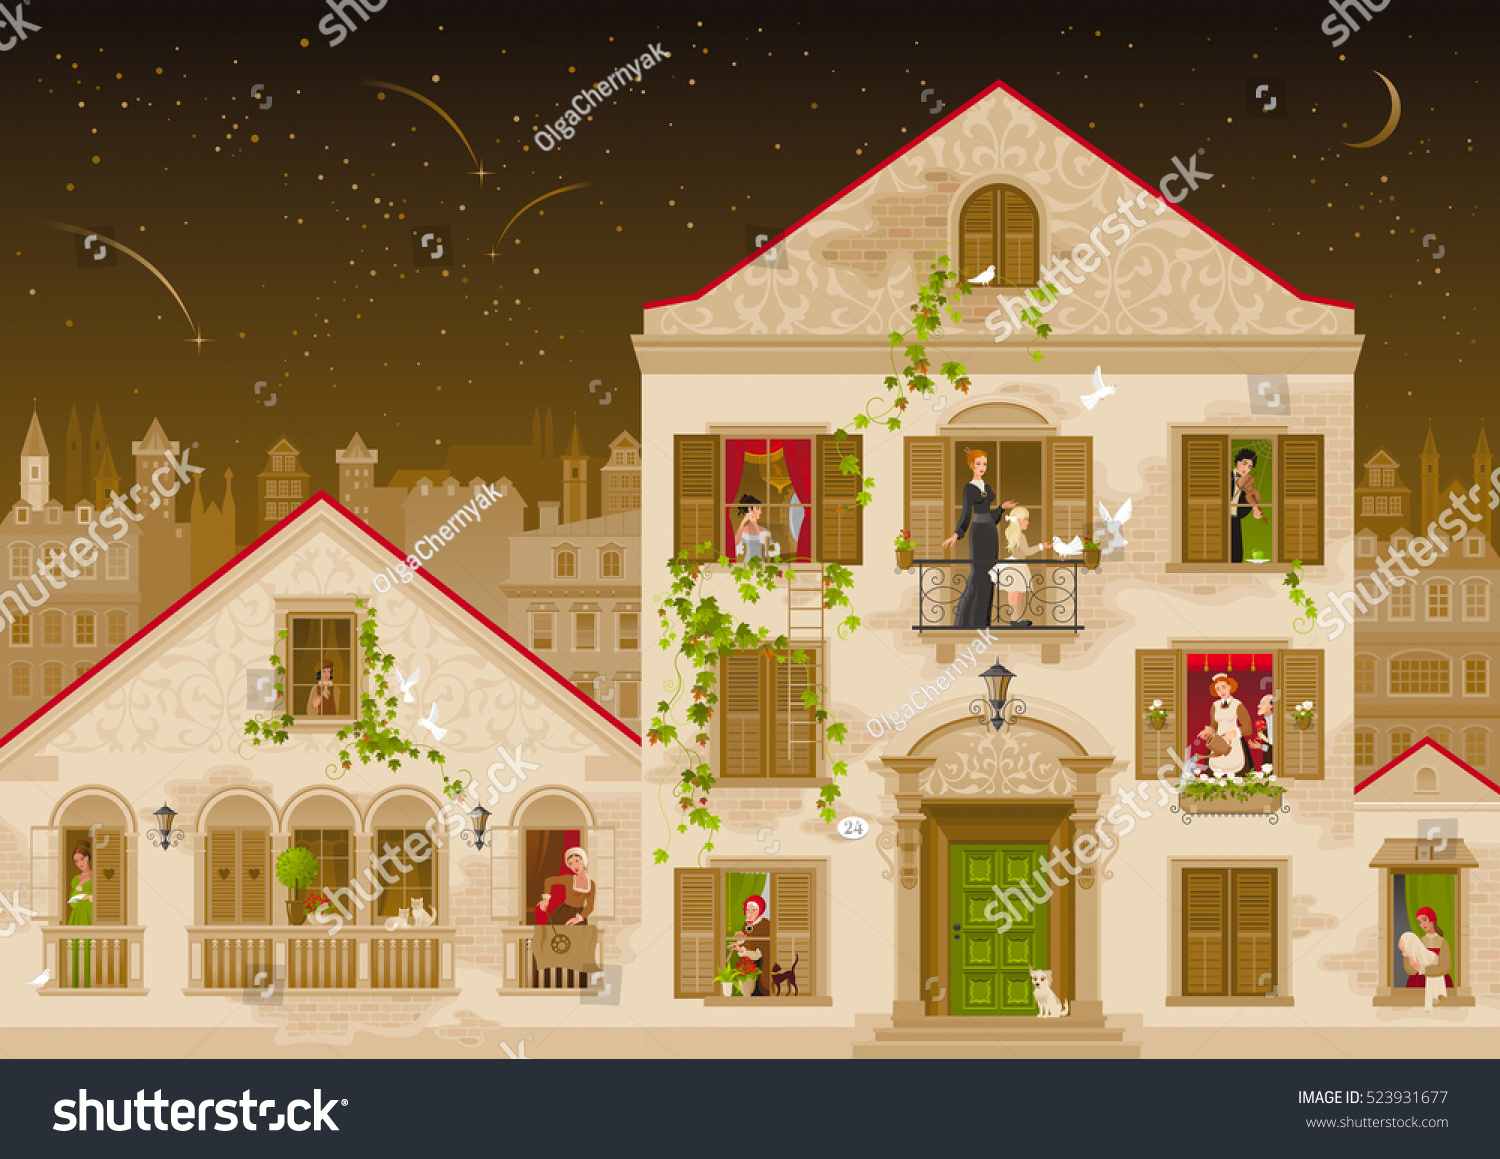 SVG of Retro stone house with people in windows, vector illustration. Vintage street architecture, victorian style building, poster template. Cute cartoon beautiful senior and young citizens, kids, adults svg